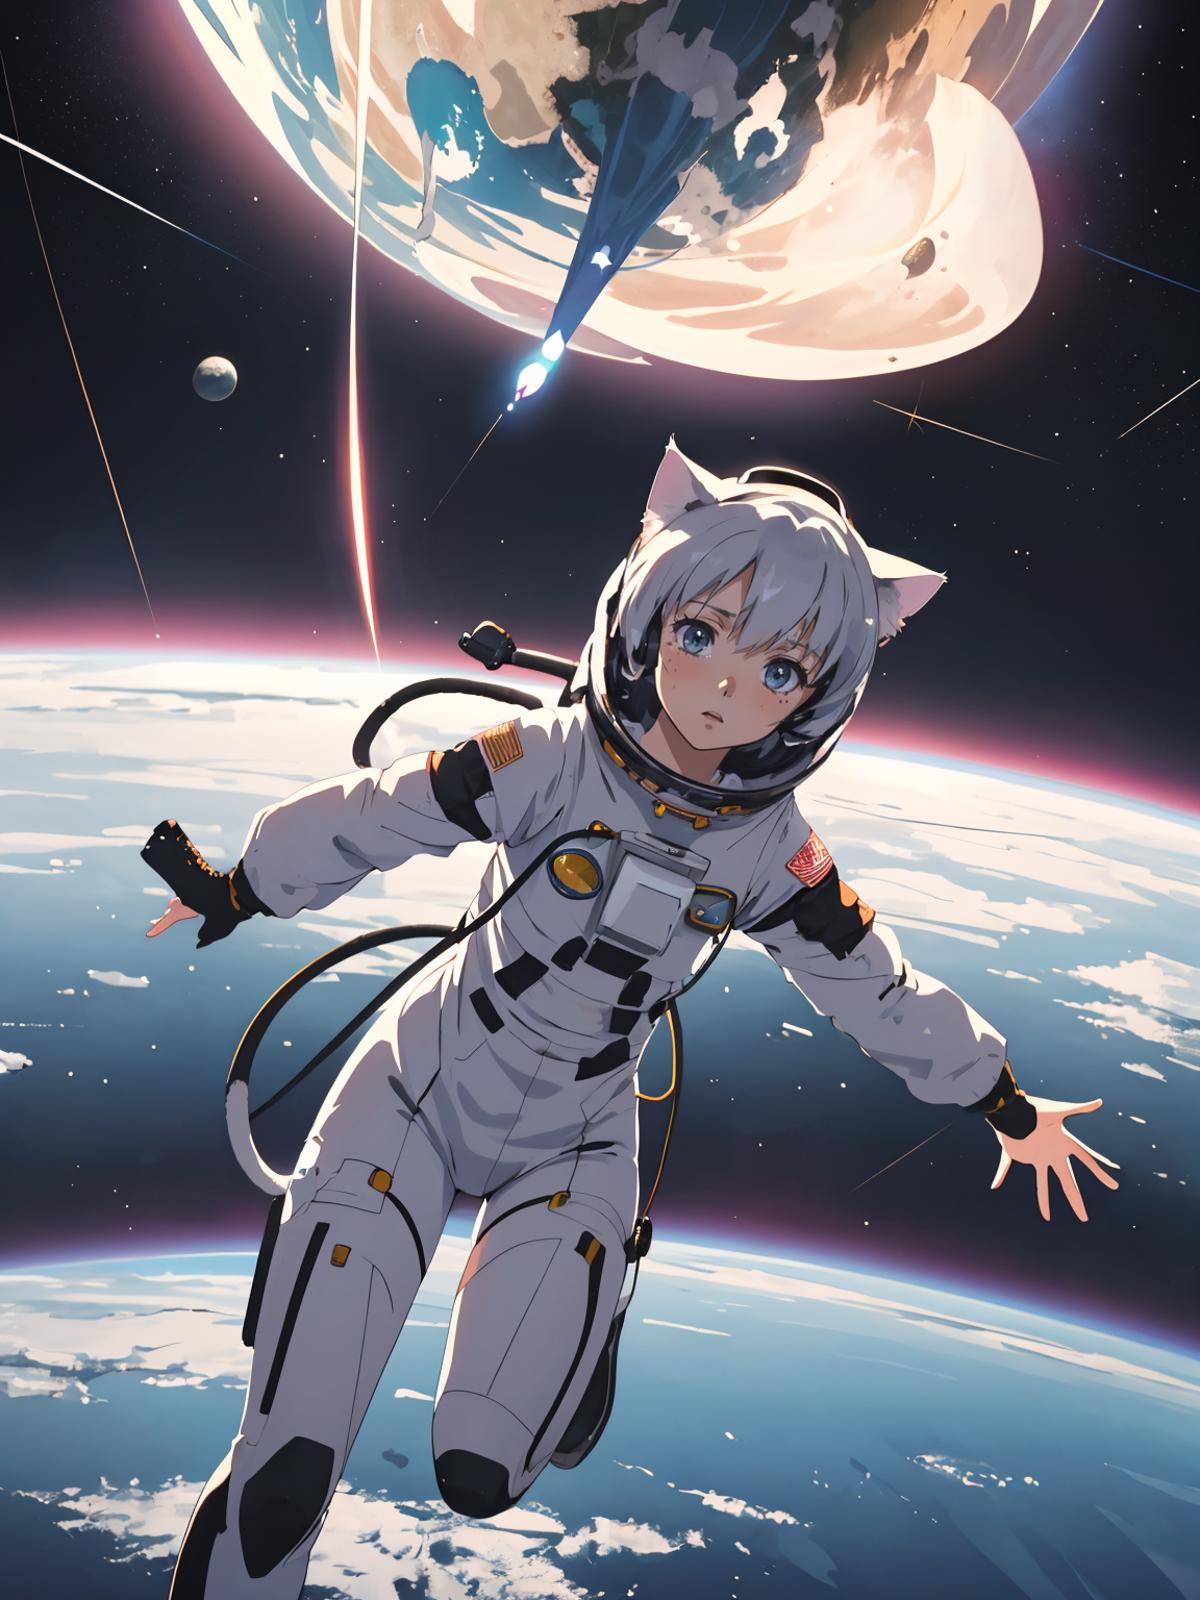 Anime character wearing a white spacesuit and helmet, looking at the camera.